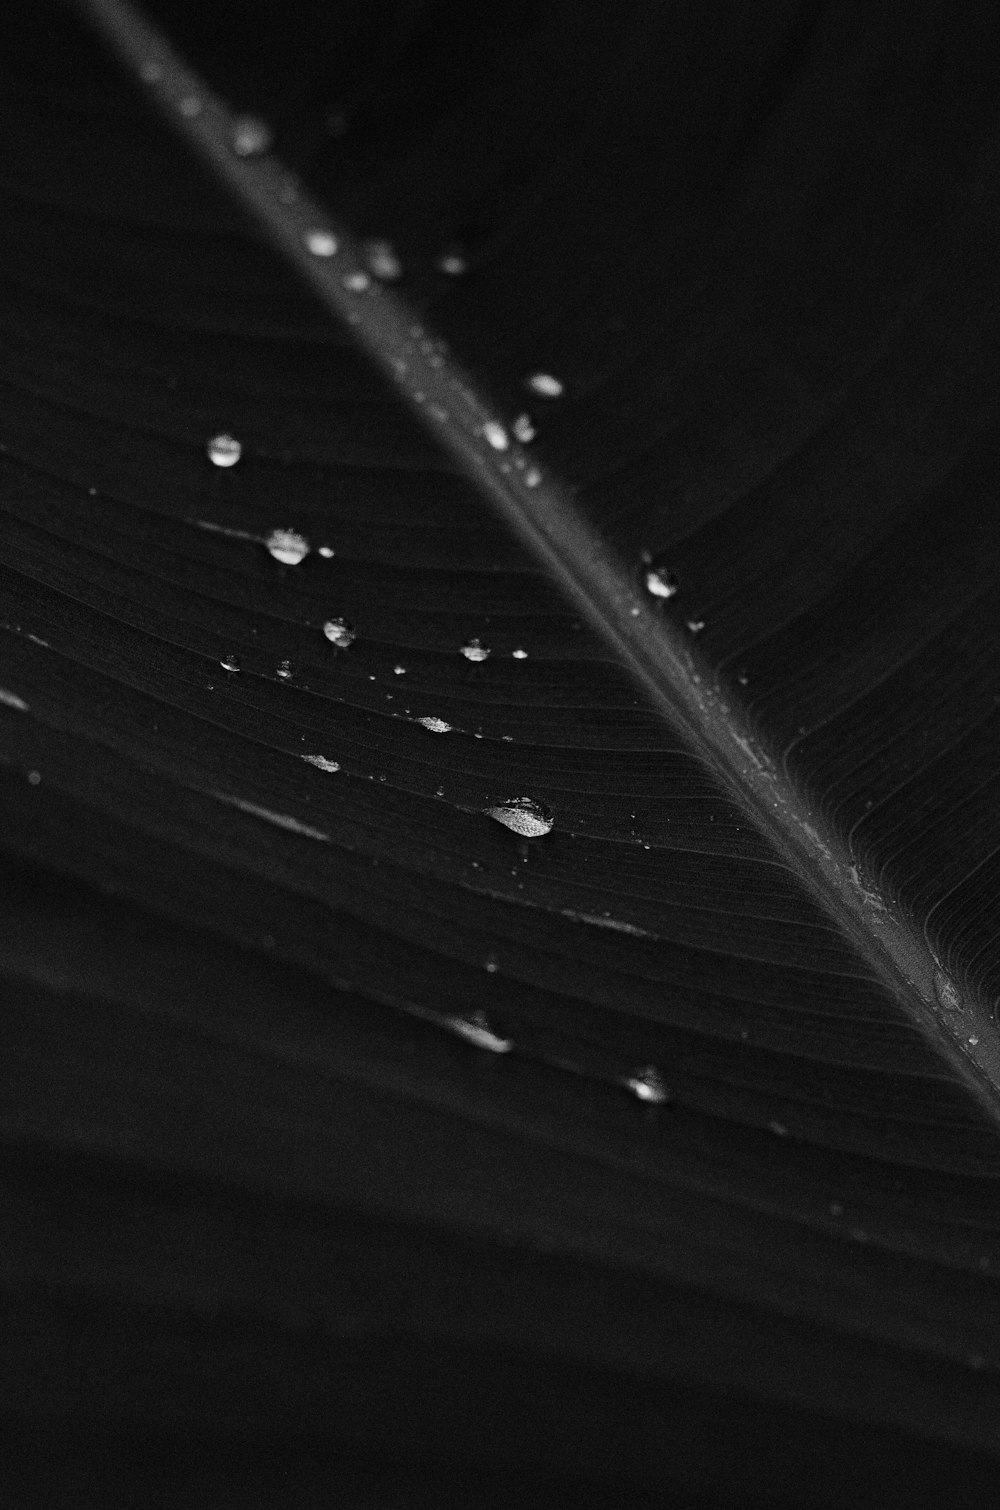 water droplets on leaf in grayscale photography